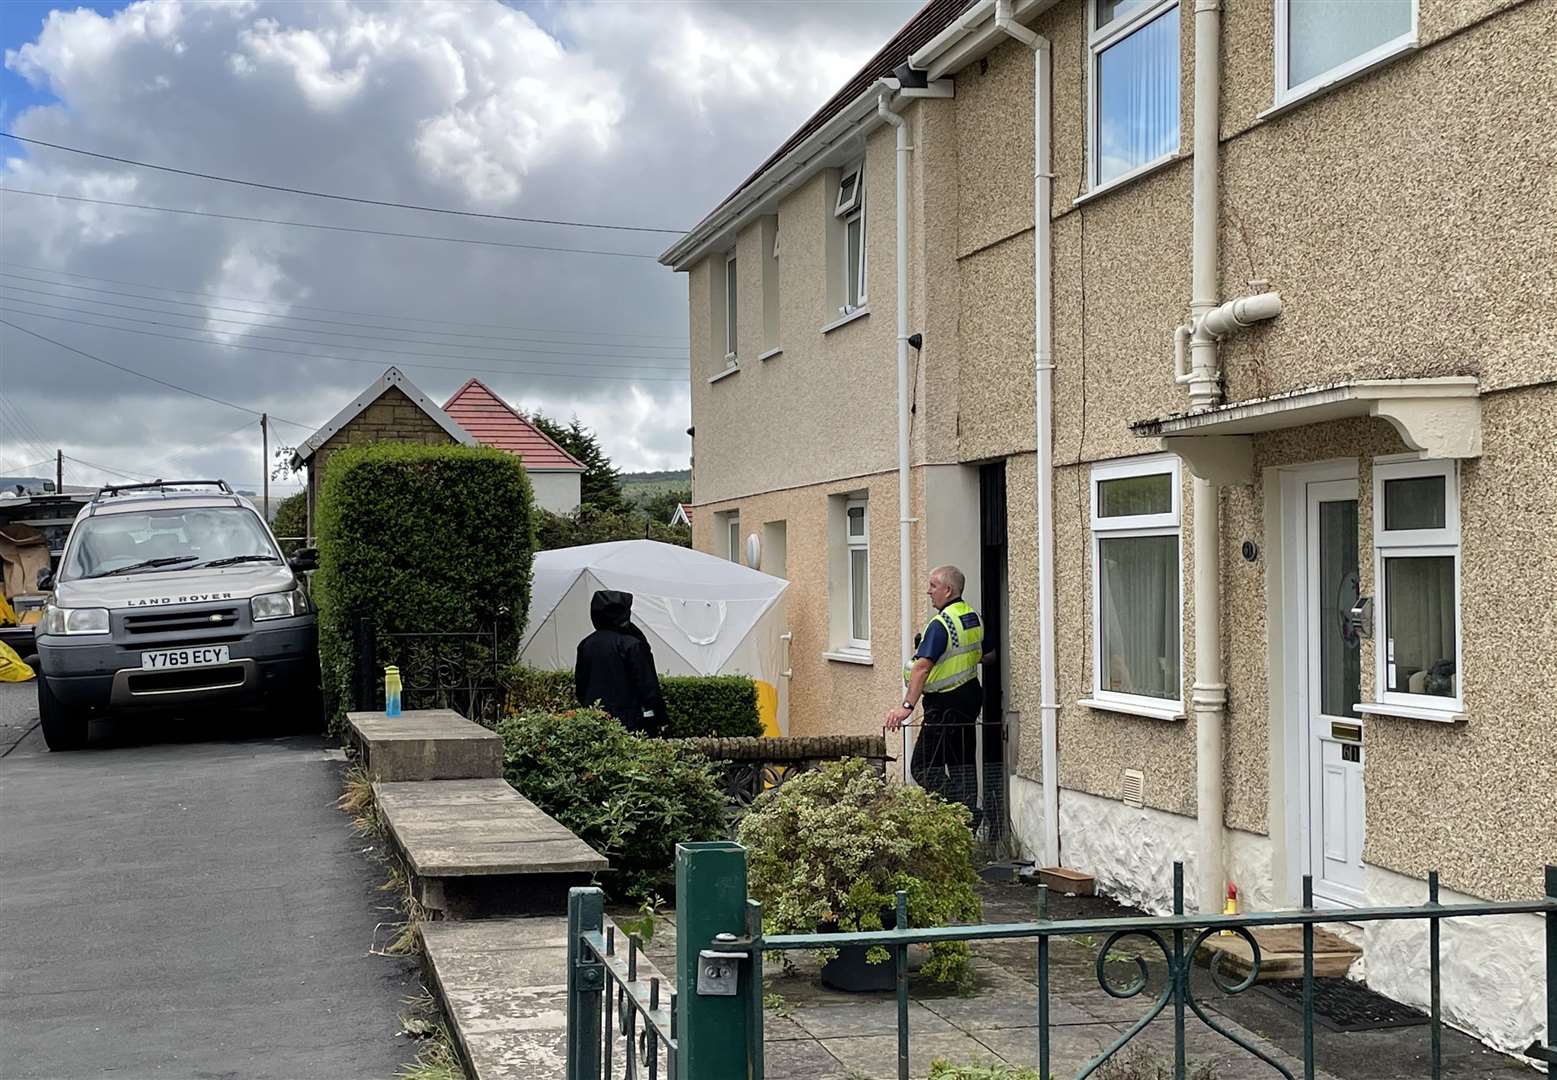 South Wales Police and forensic units at the scene (Bronwen Weatherby/PA)